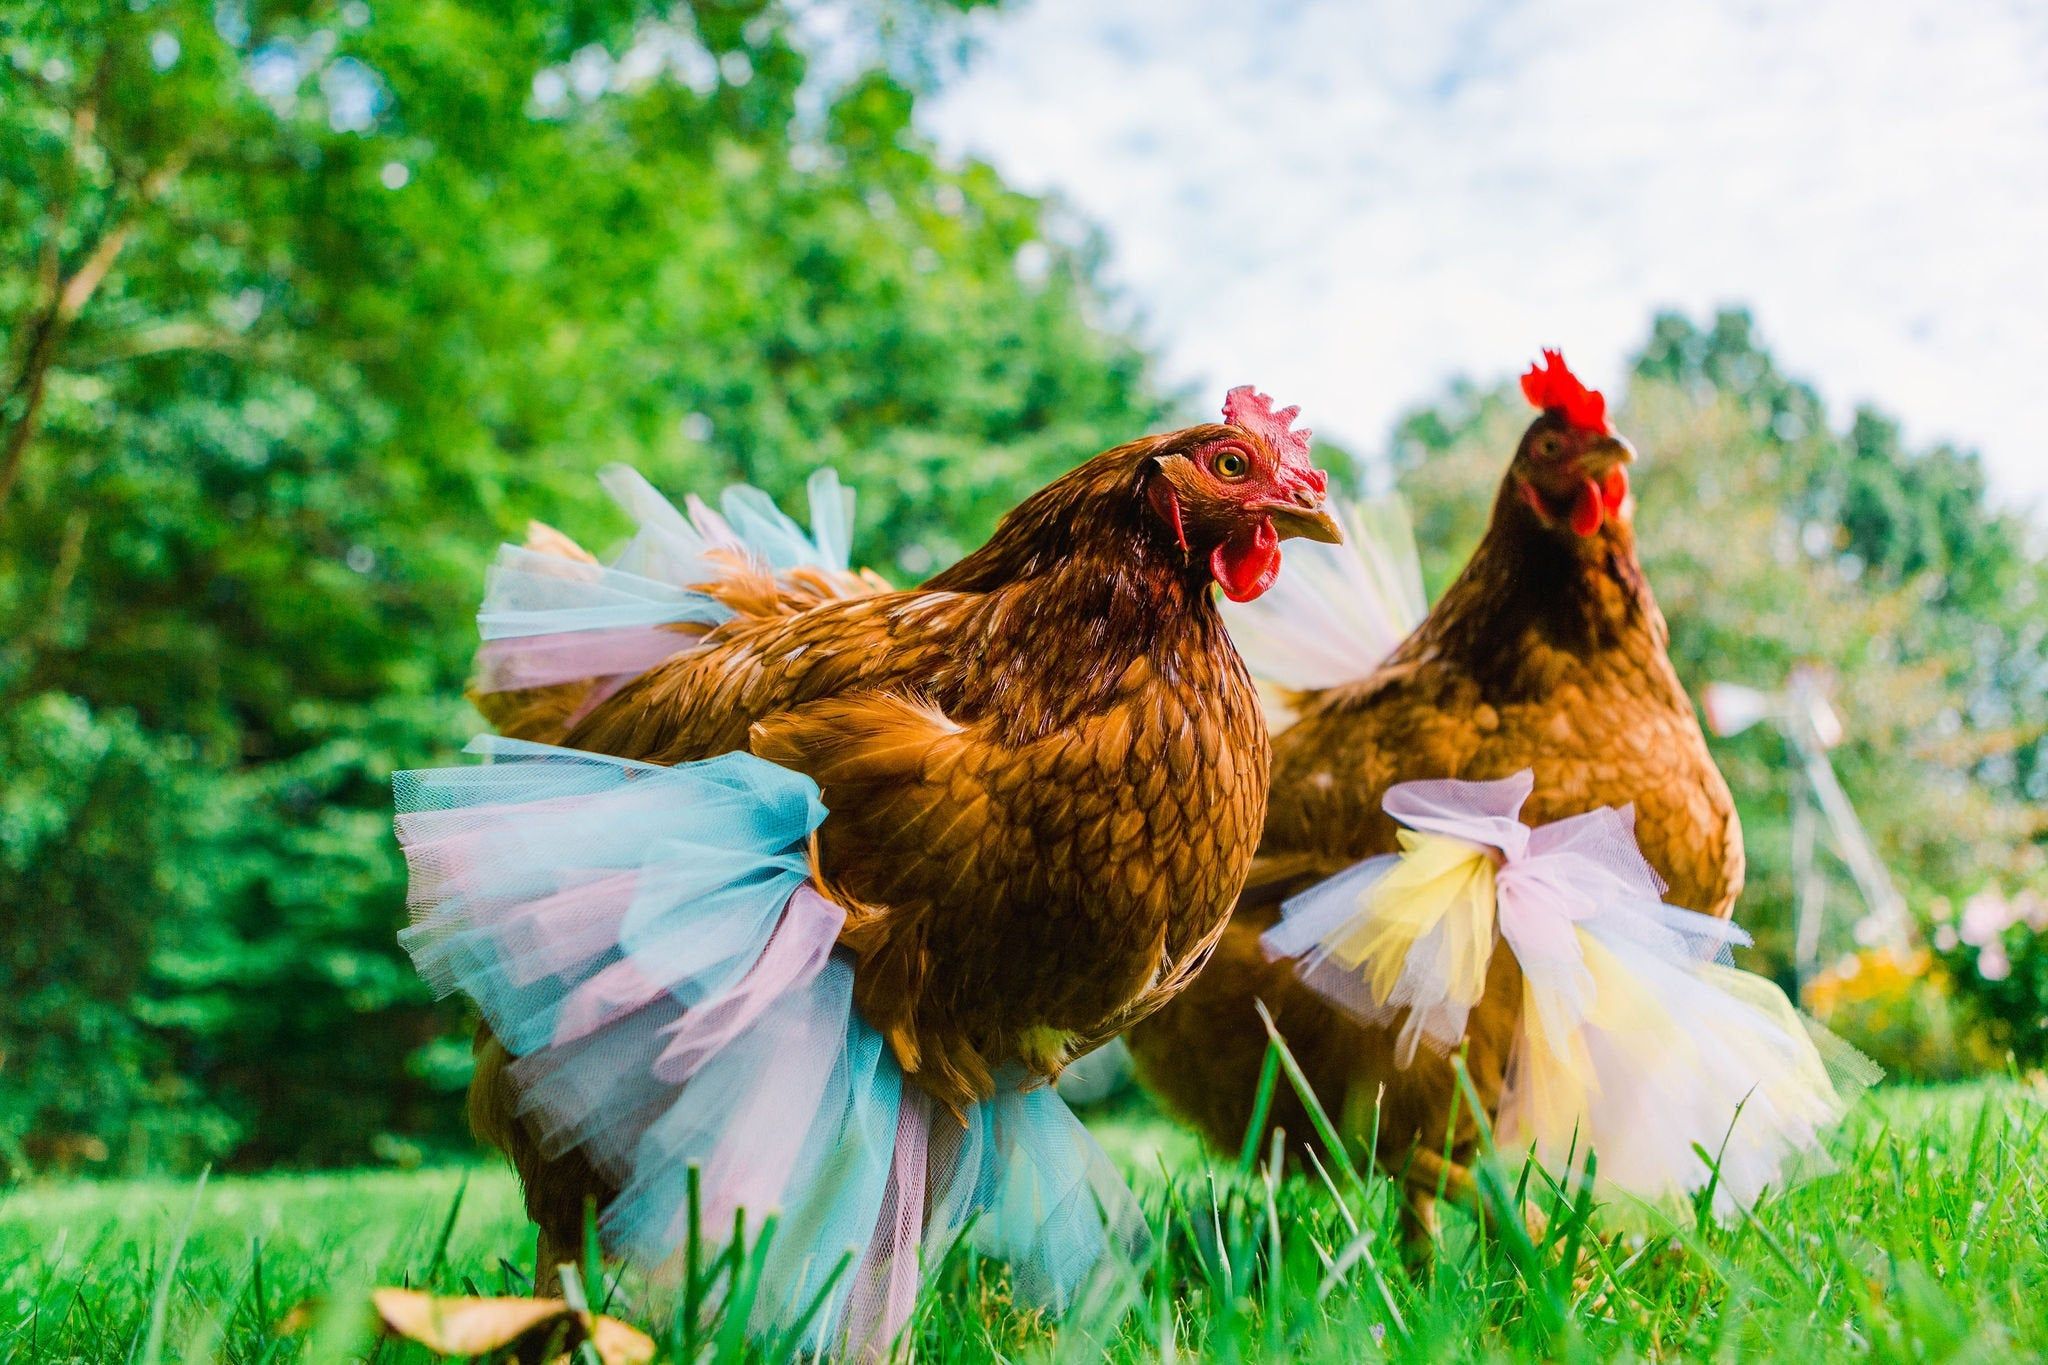 charlie keesee recommends chickens in skirts pic